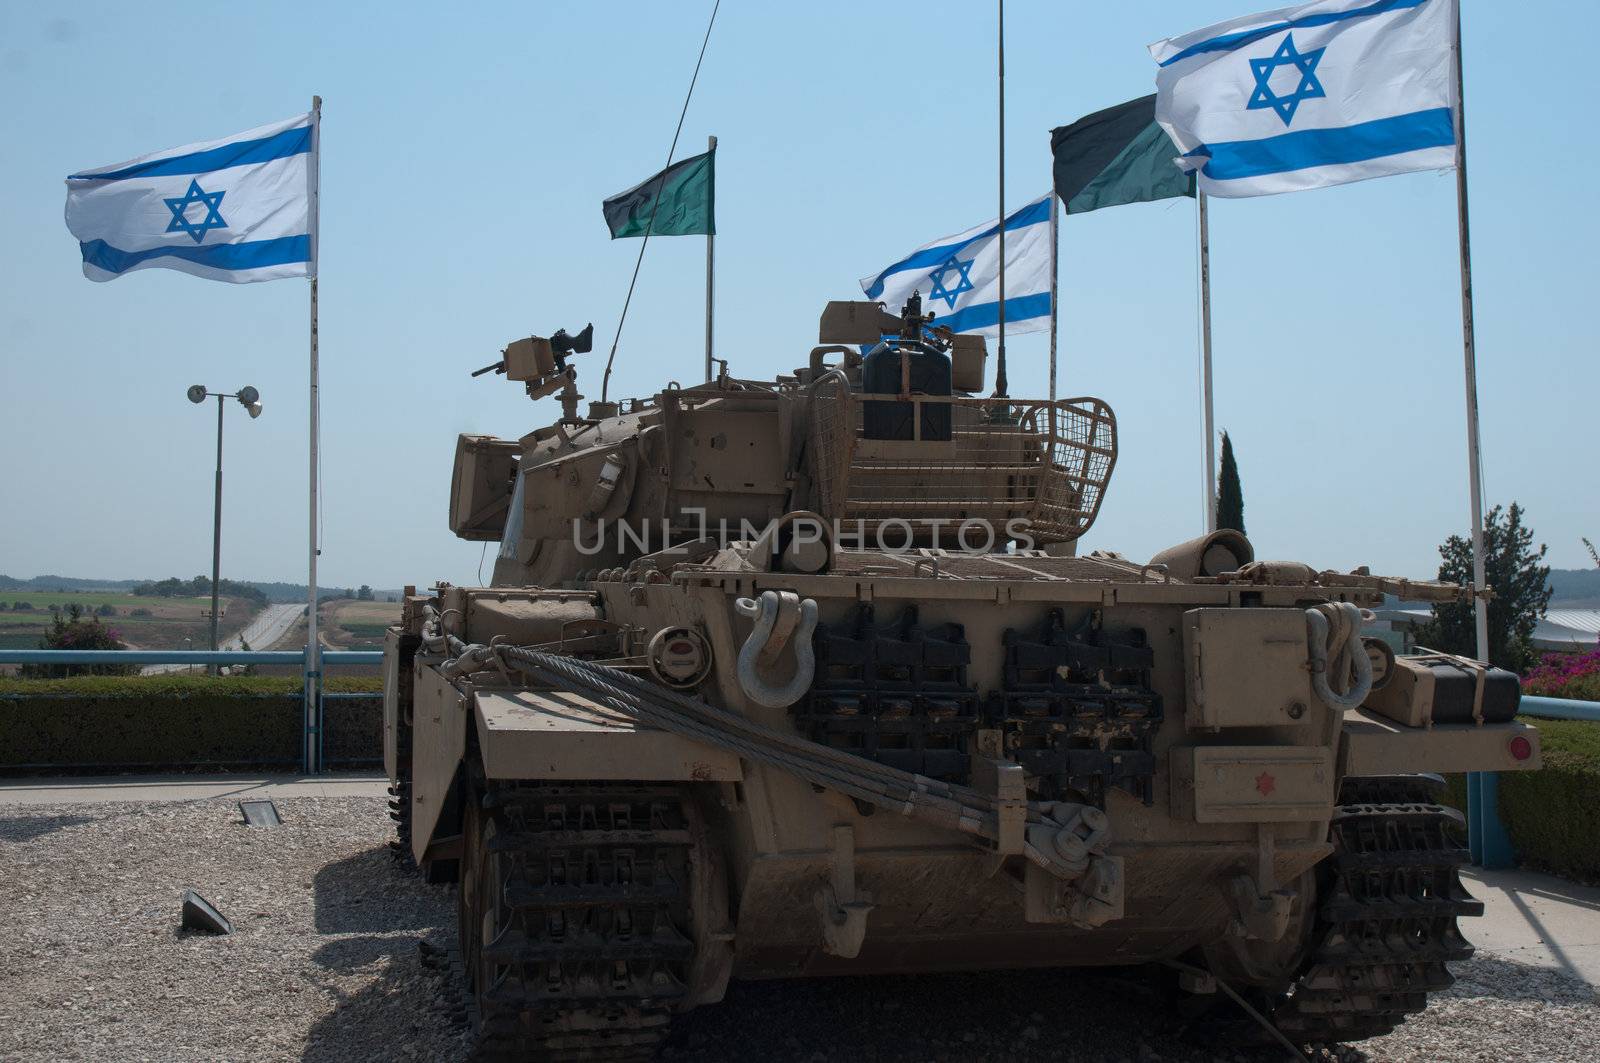 Old tank against the blue sky and white-blue flags of Israel. Israel, Latrun.